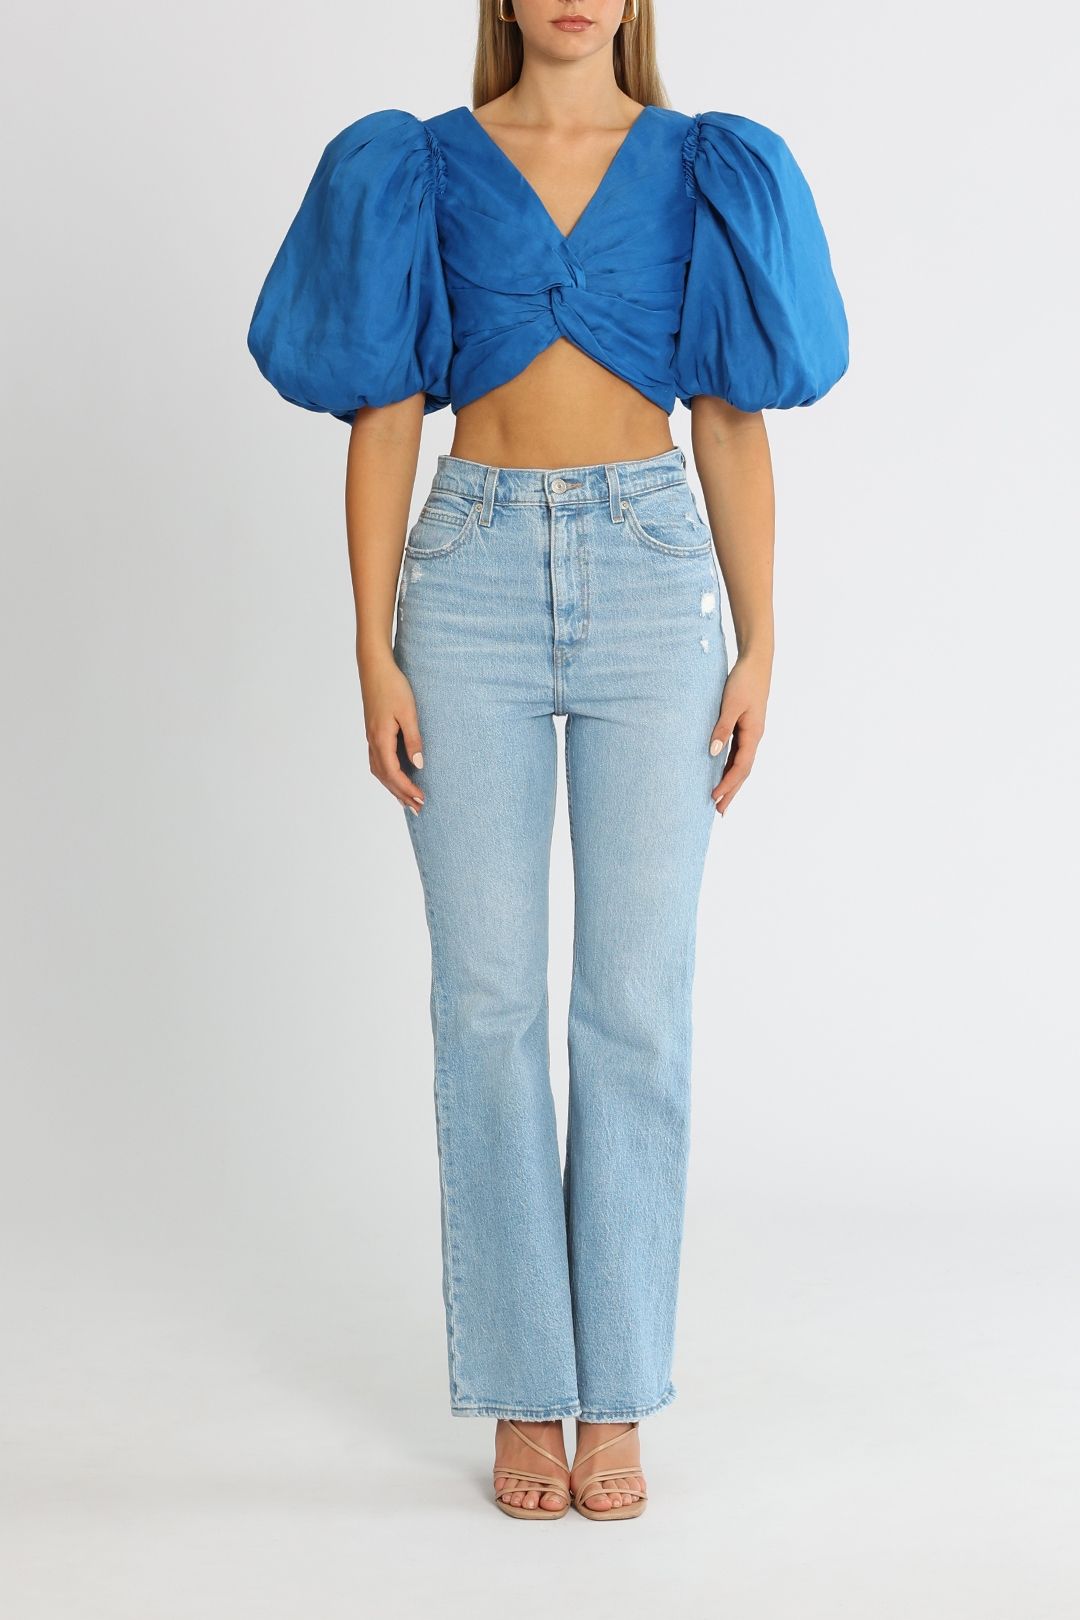 AJE Reverb Puff Sleeve Cropped Top Cobalt Blue